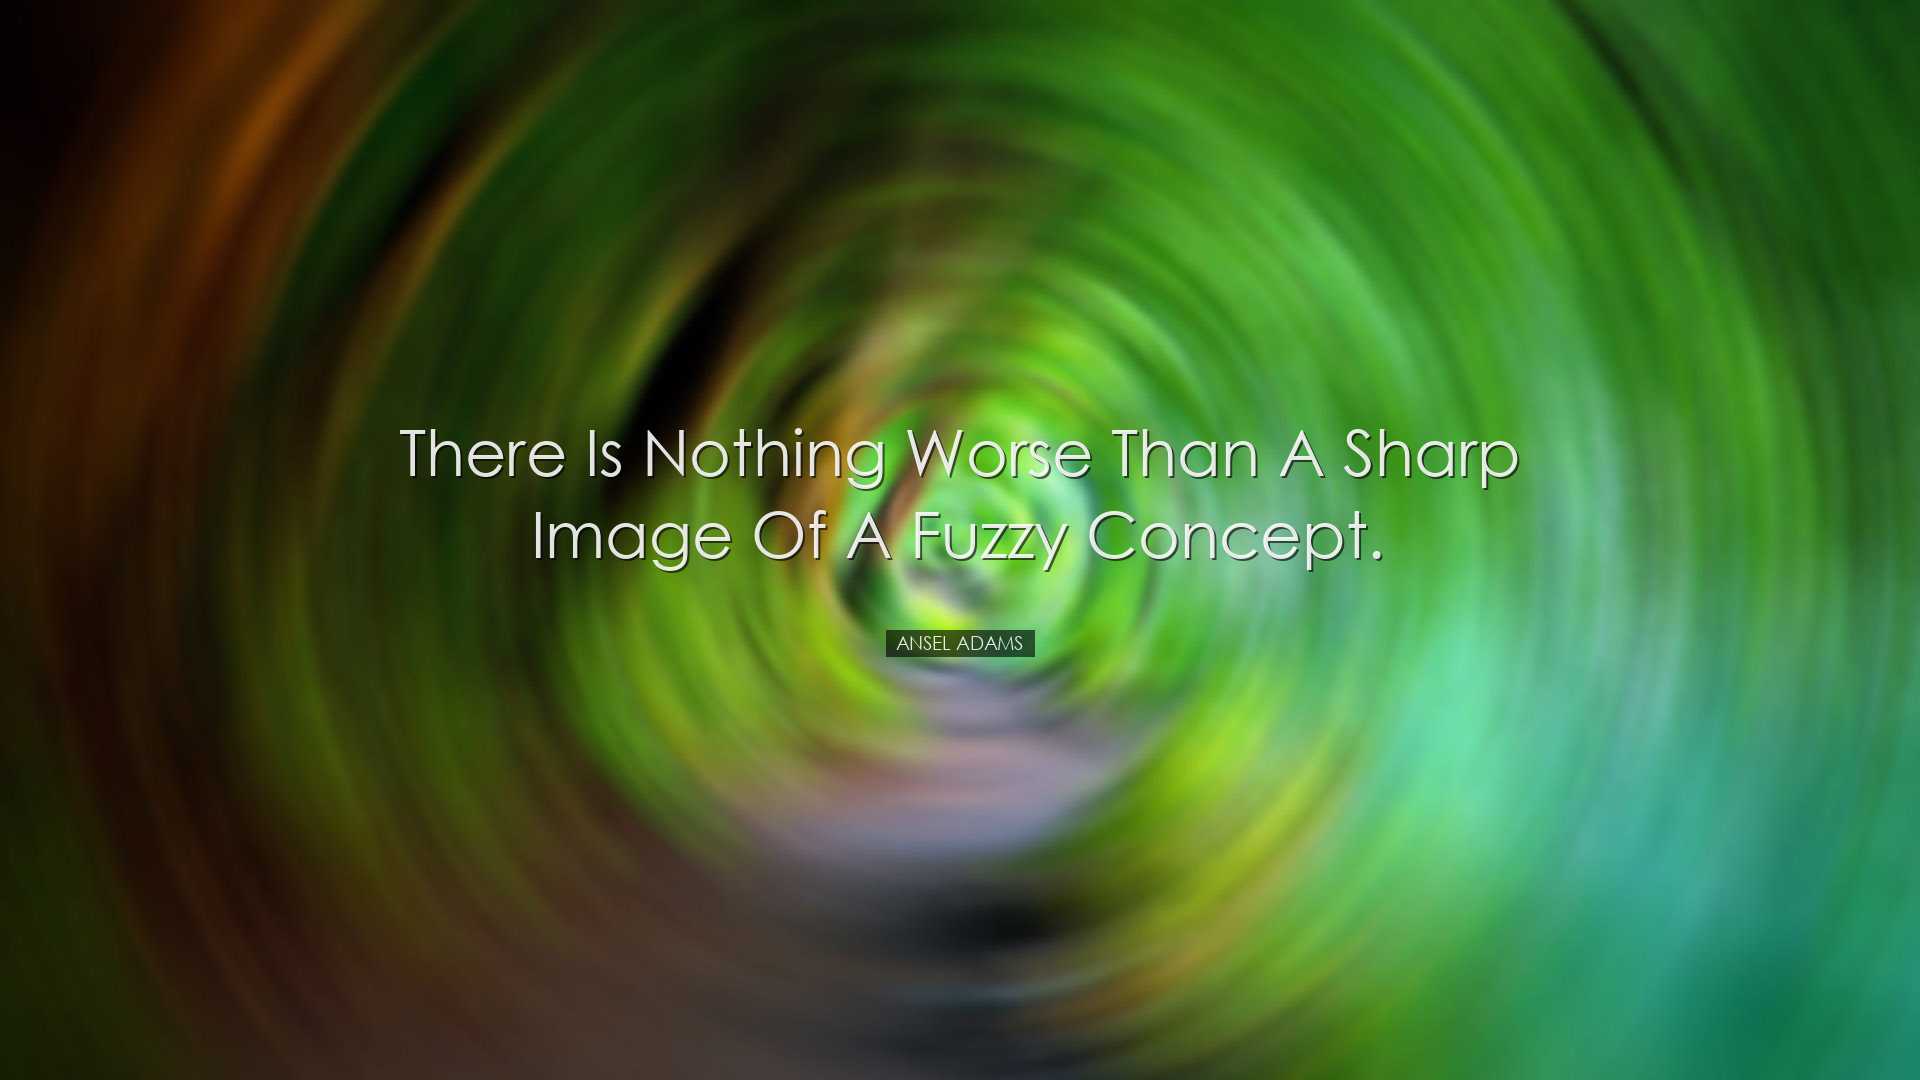 There is nothing worse than a sharp image of a fuzzy concept. - An